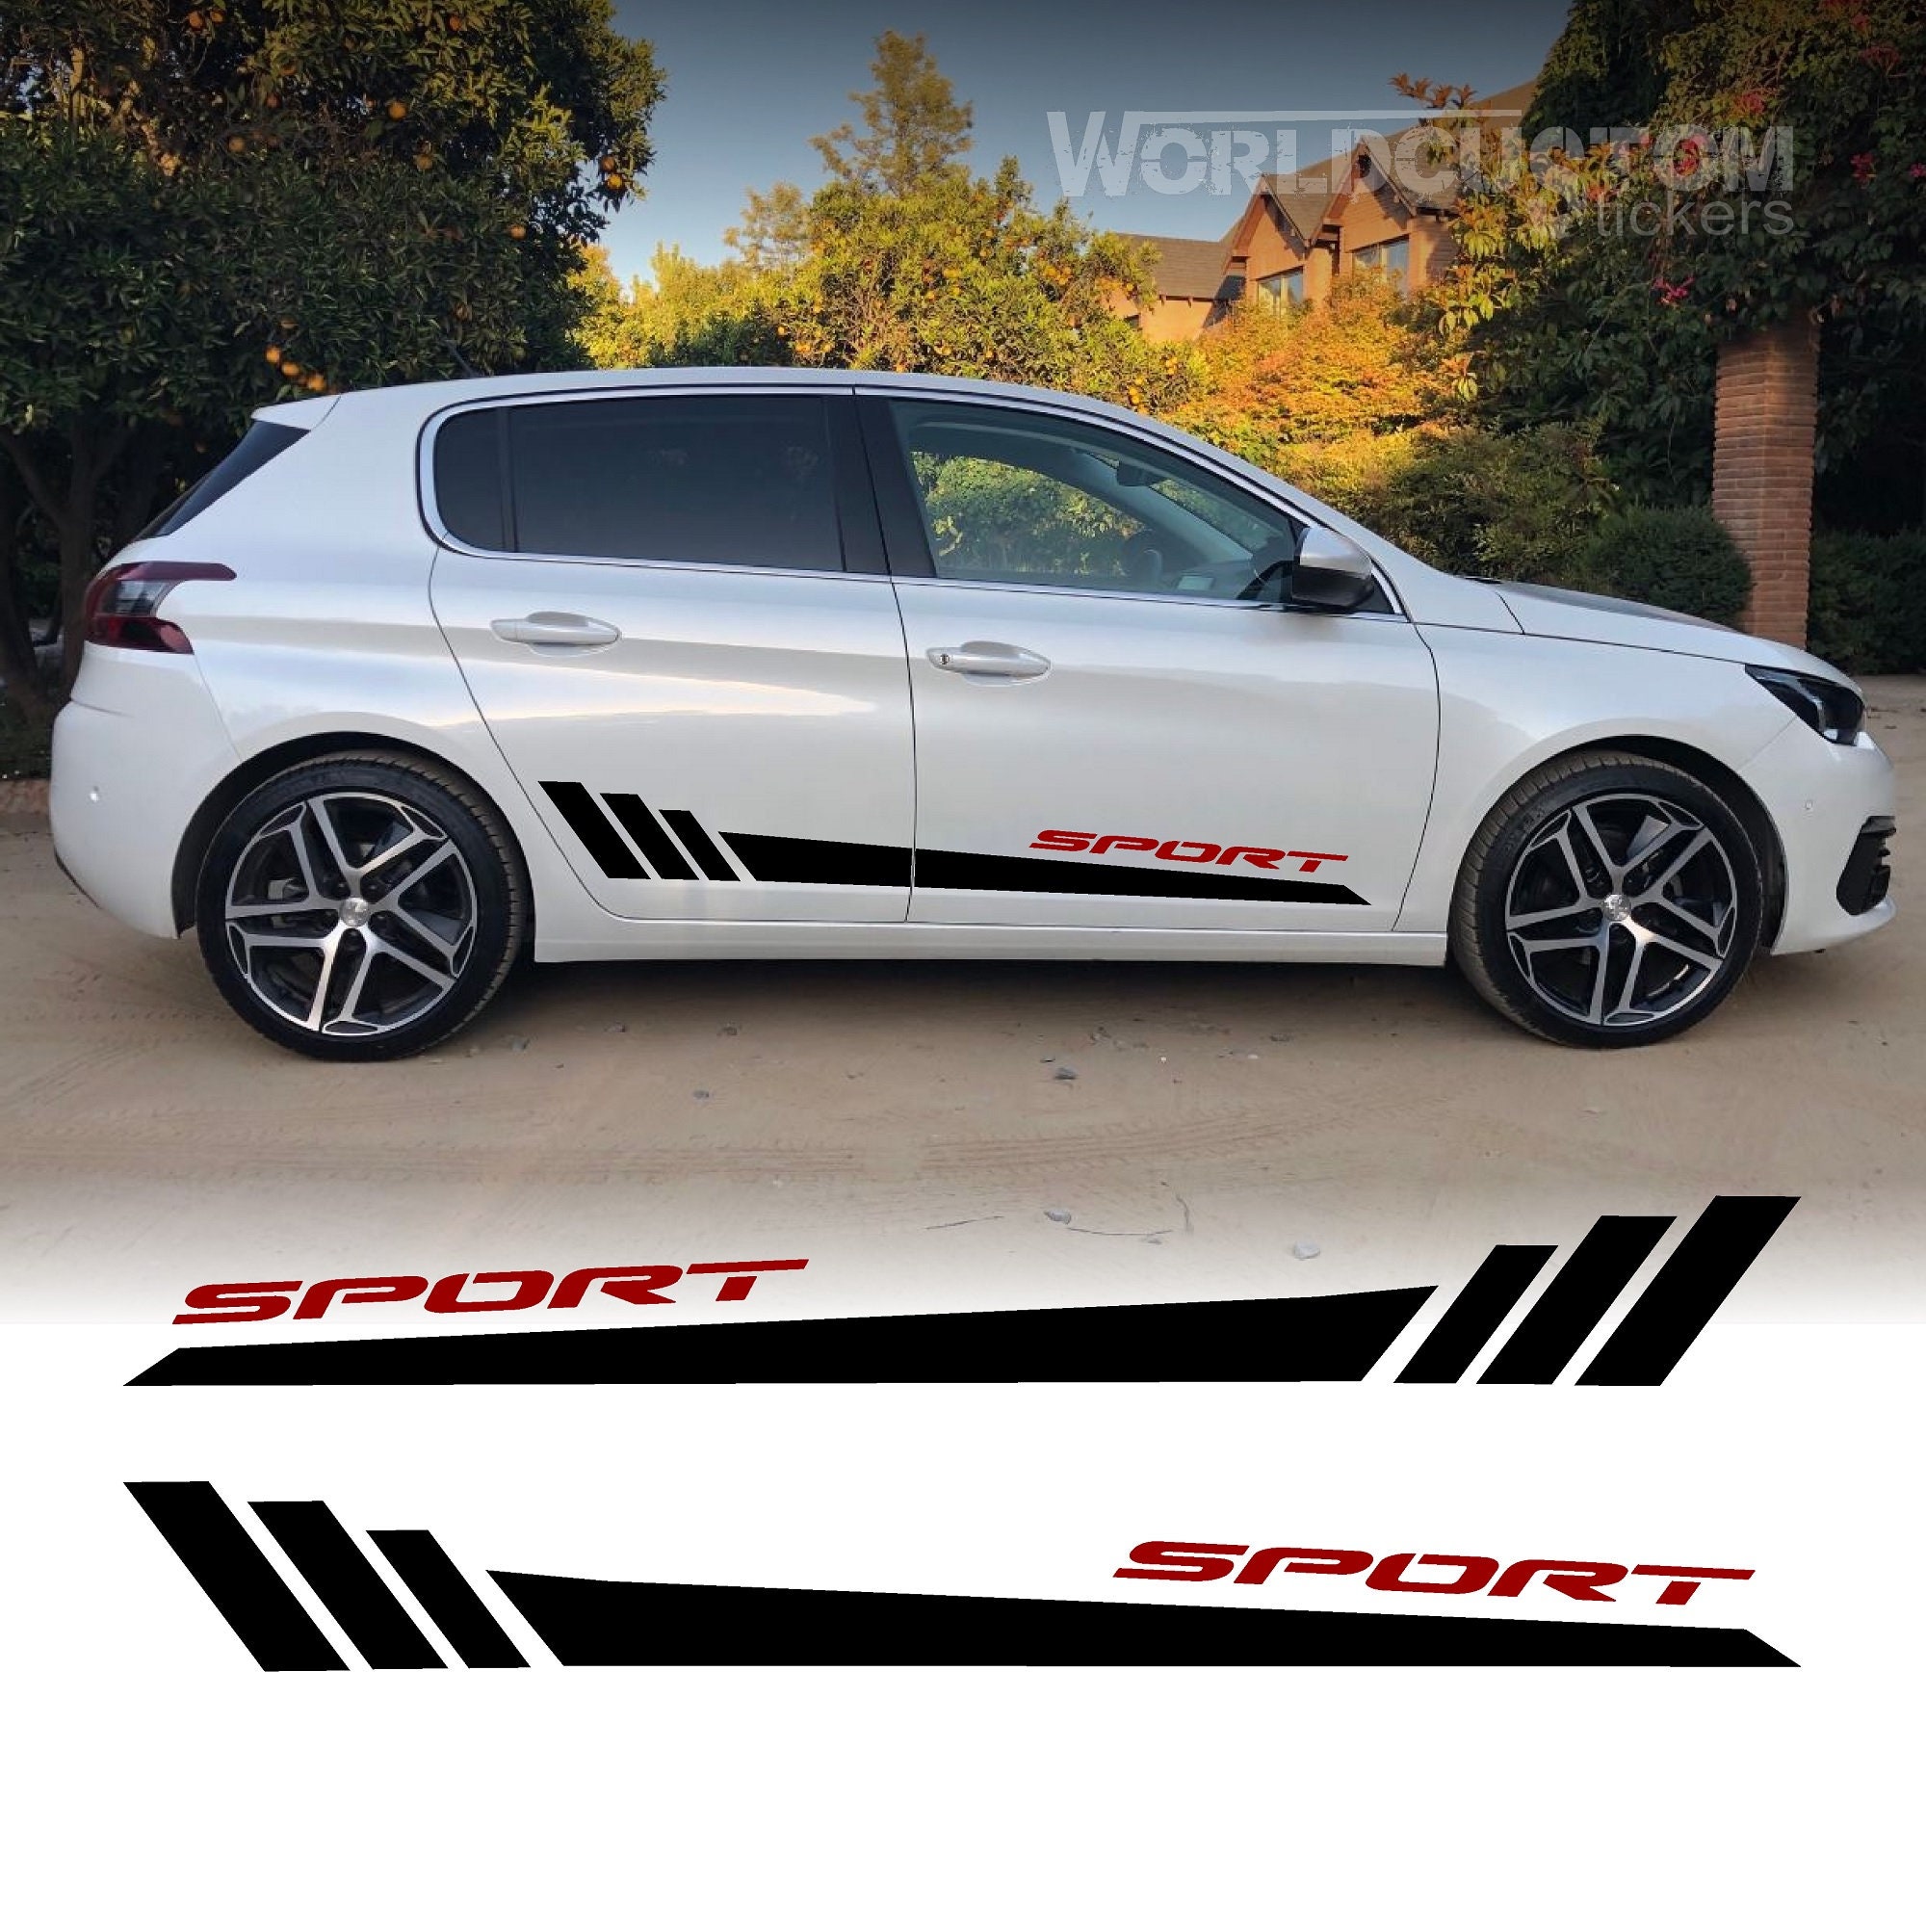 Stickers Stickers Sport side bands for PEUGEOT 308 Feline Auto Tuning